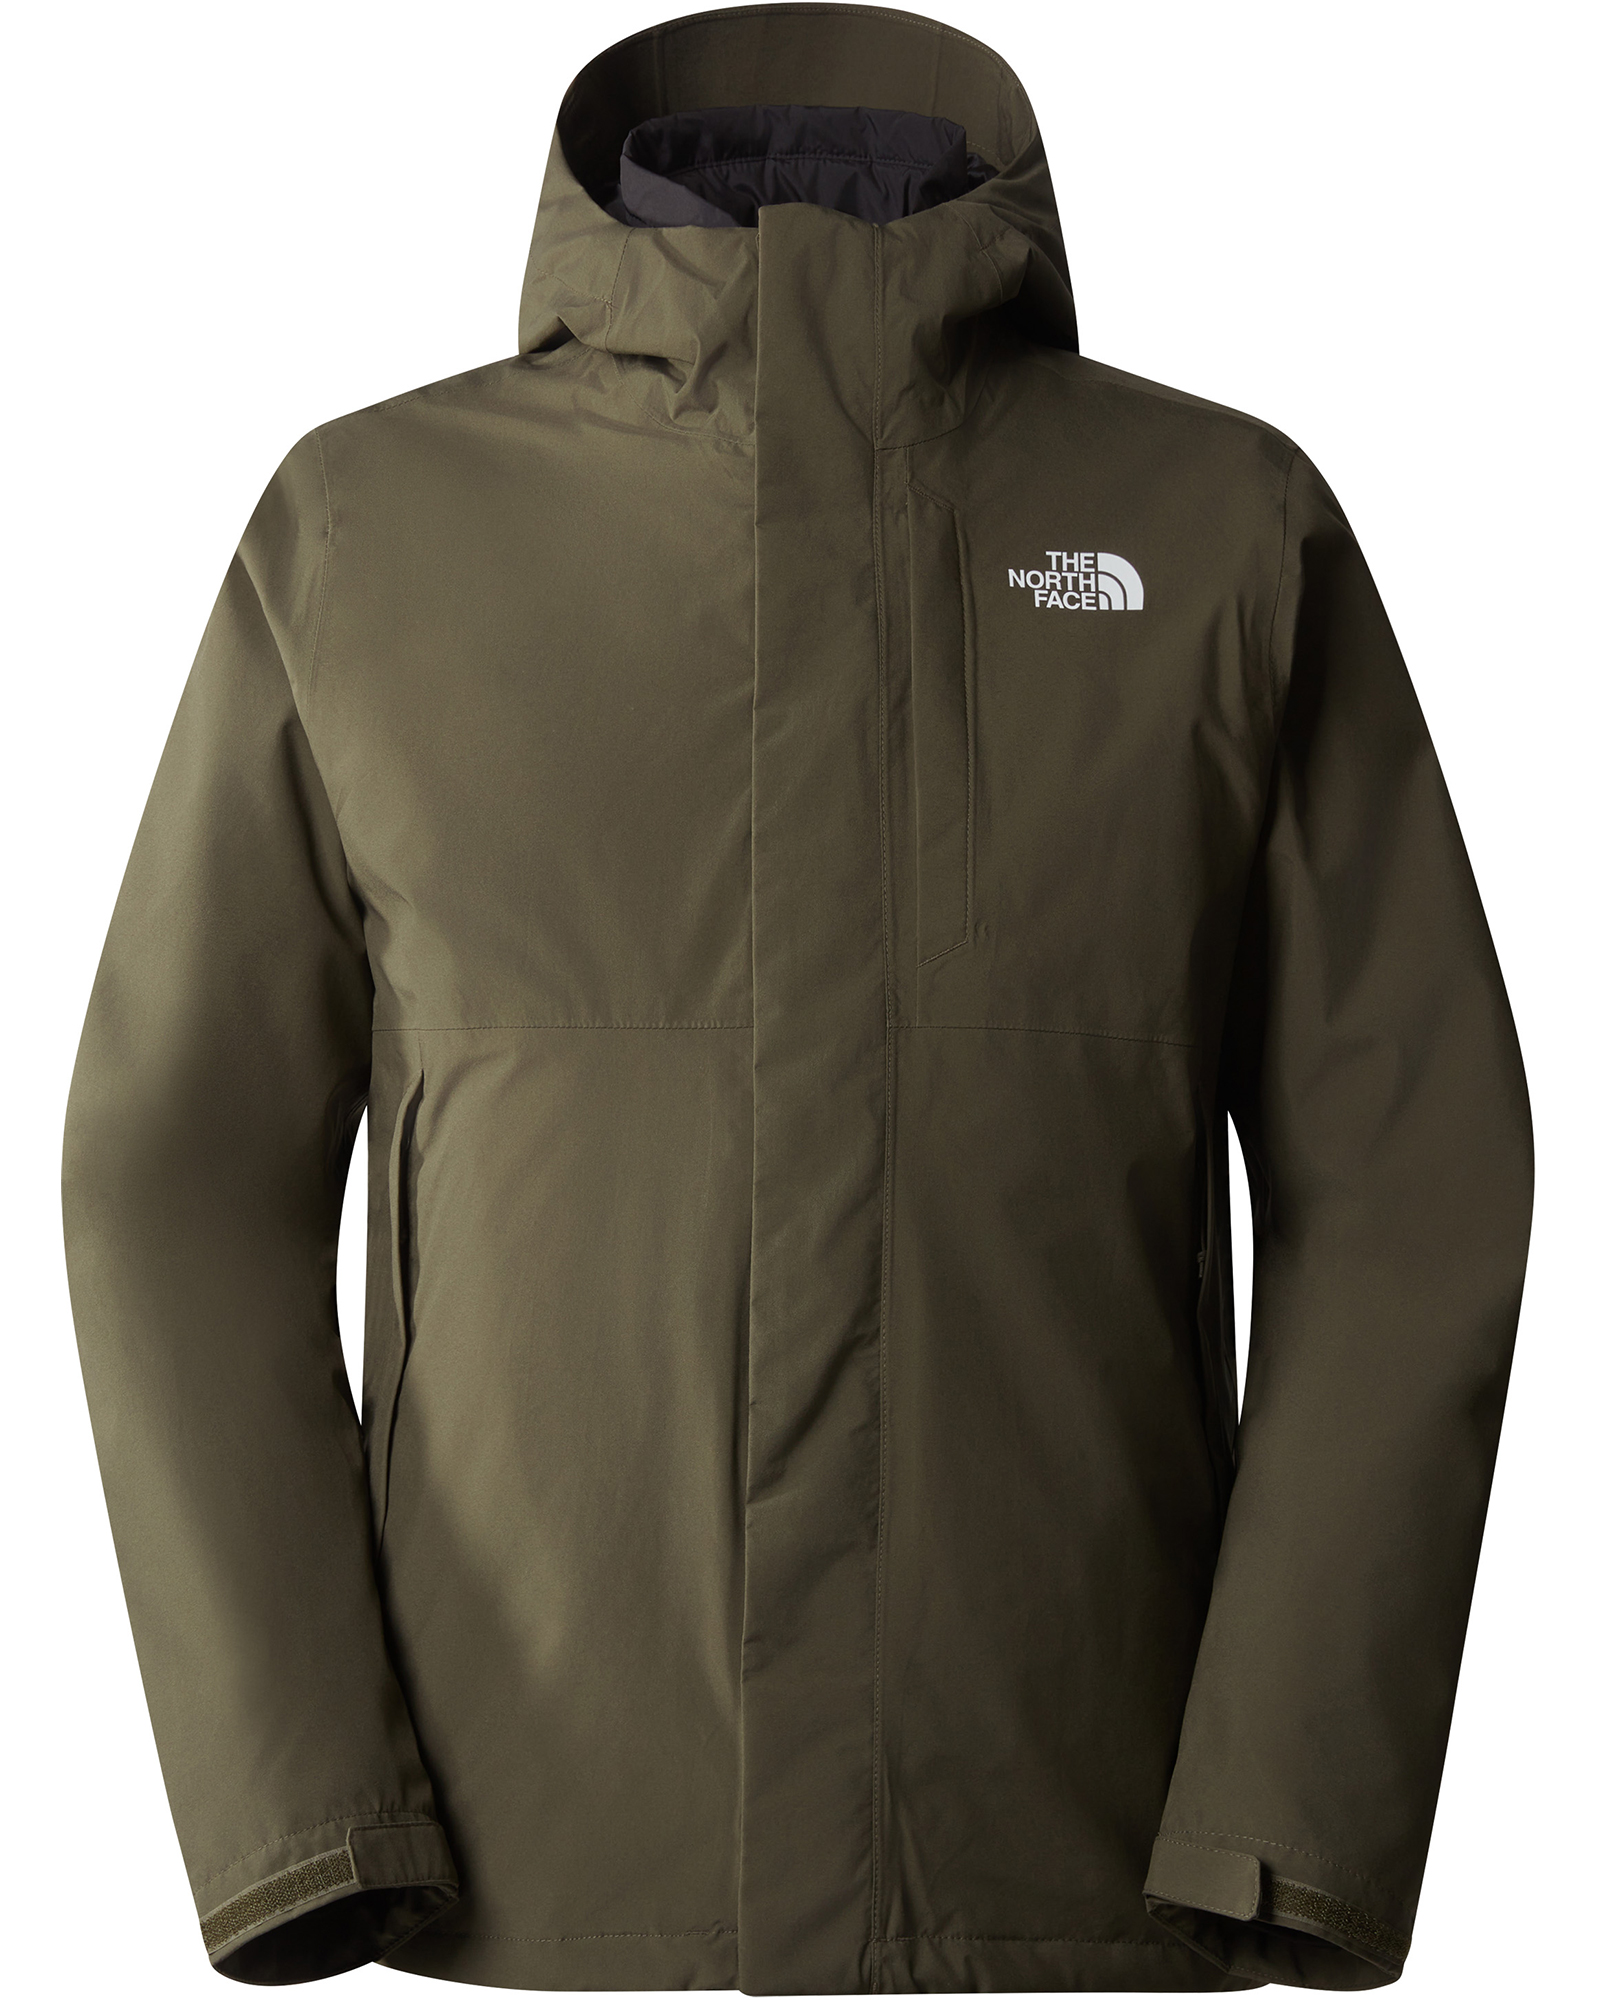 The North Face Carto Men’s Triclimate Jacket - New Taupe Green-TNF Black XL